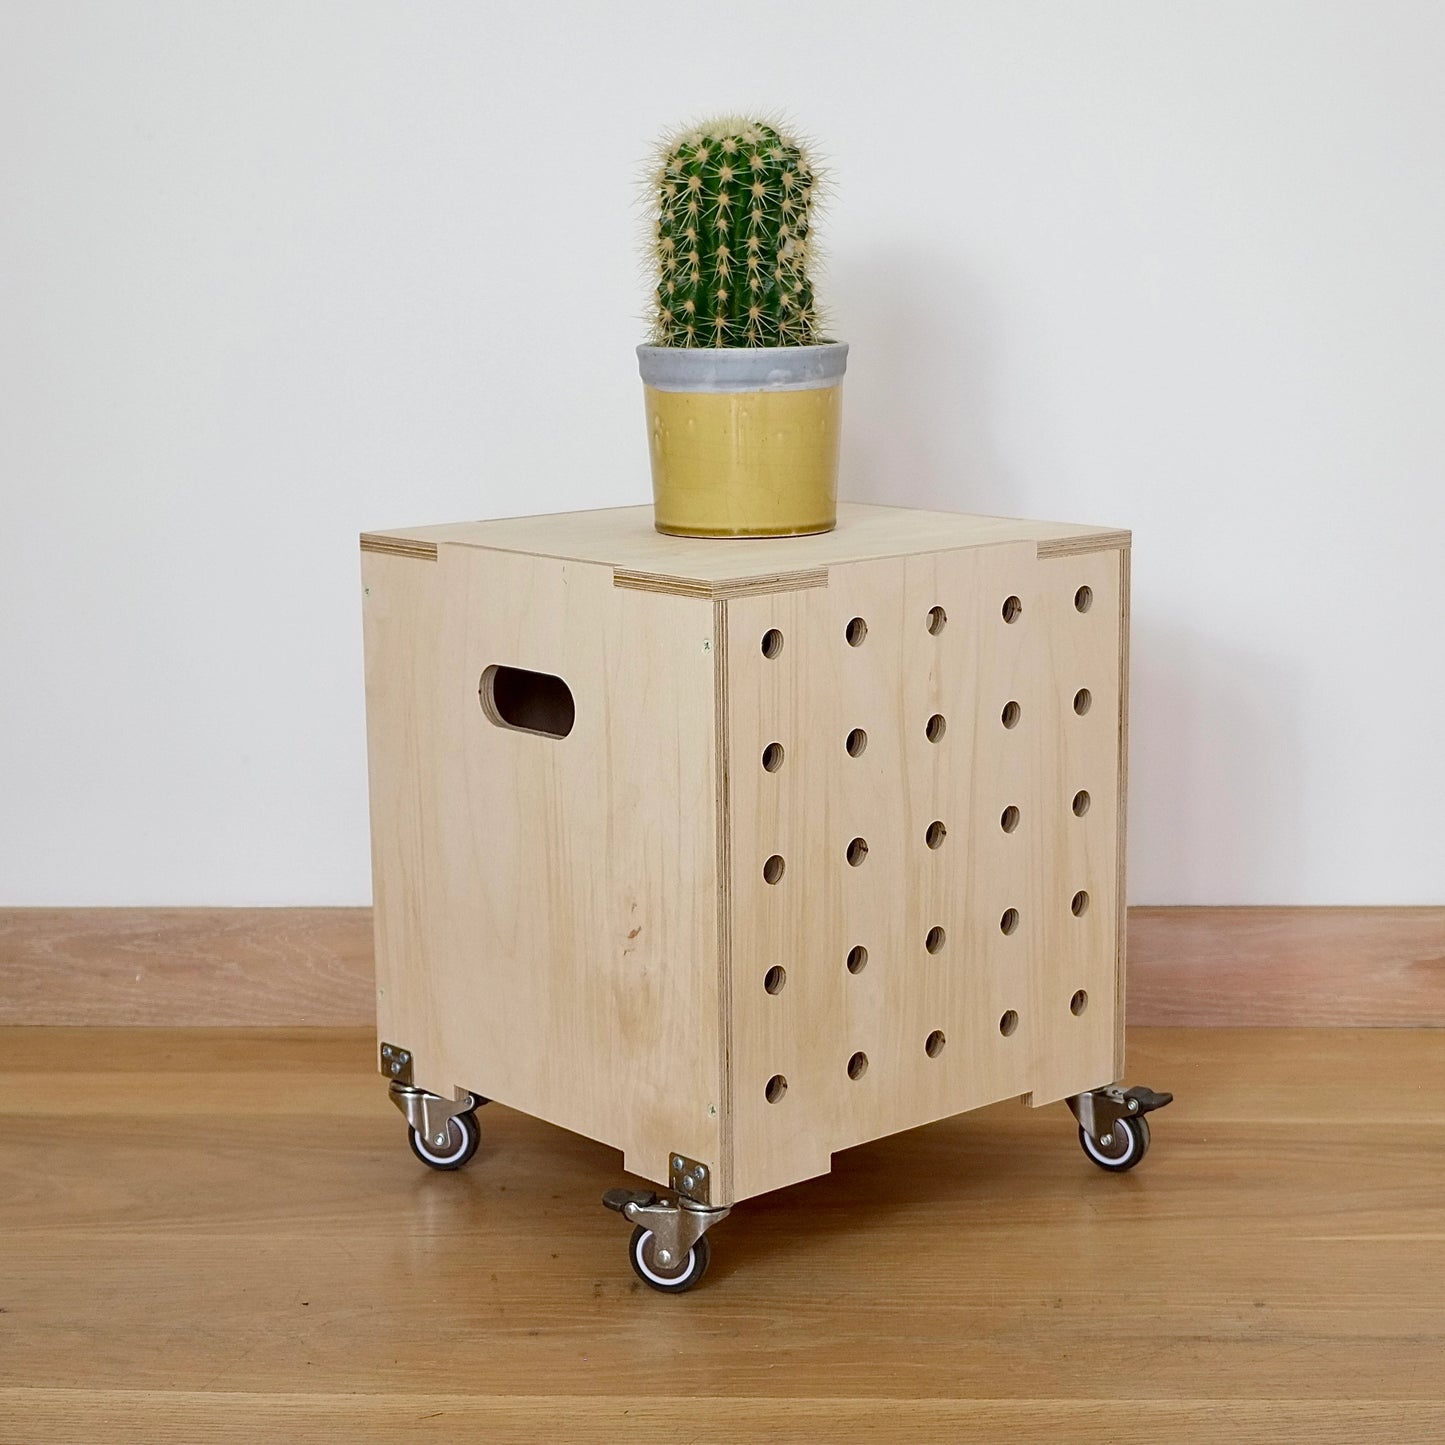 A modern pale plywood square shaped storage crate, faces diagonally to the right and sits on a wooden floor. There are five rows of holes cut in the front facet, it has castors and a lid with cactus on top.